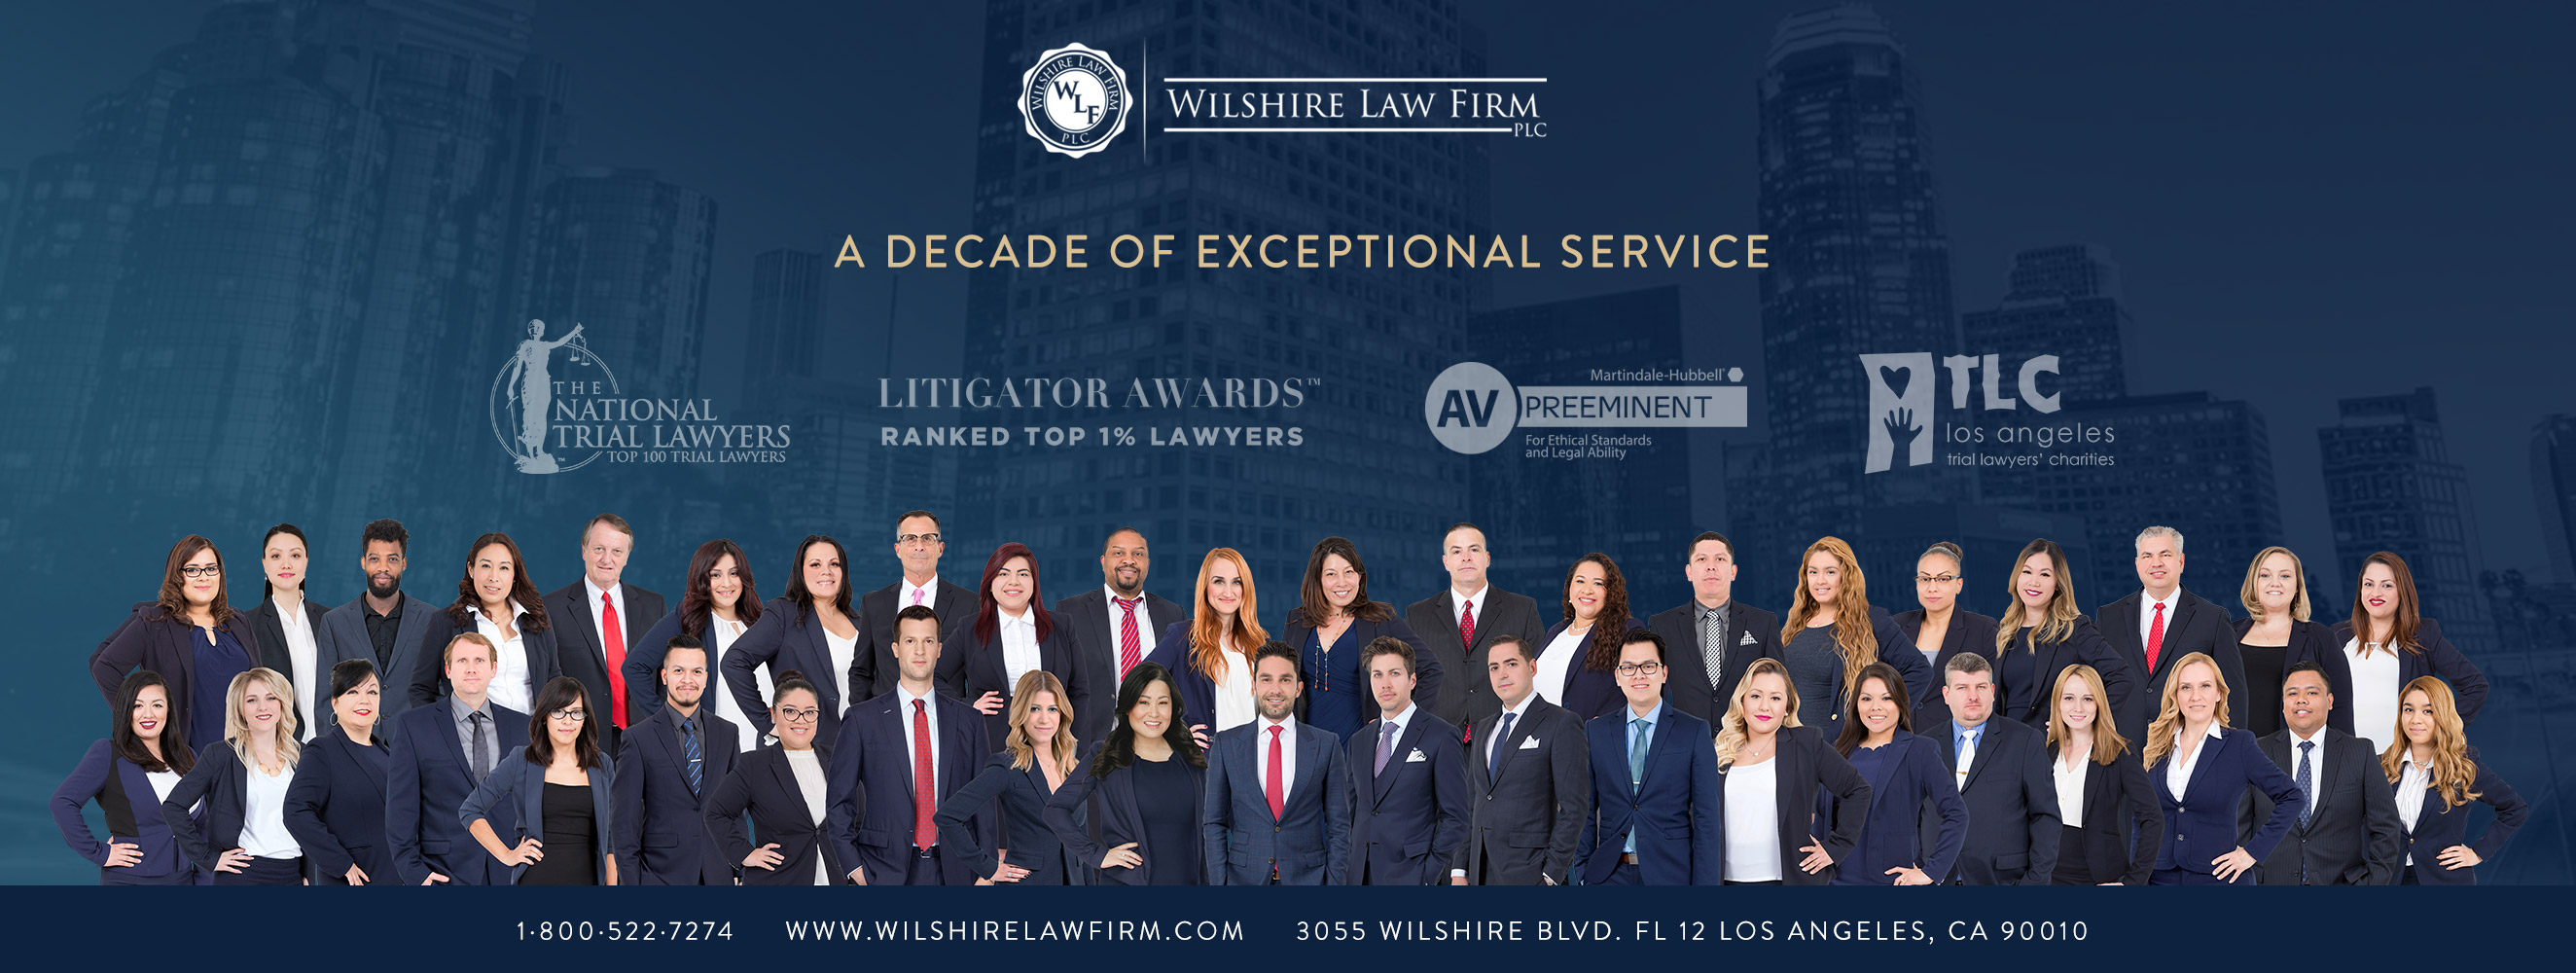 Wilshire Law Firm Injury & Accident Attorneys | 2535 Camino del Rio S #305, San Diego, CA 92108, United States | Phone: (619) 304-4182